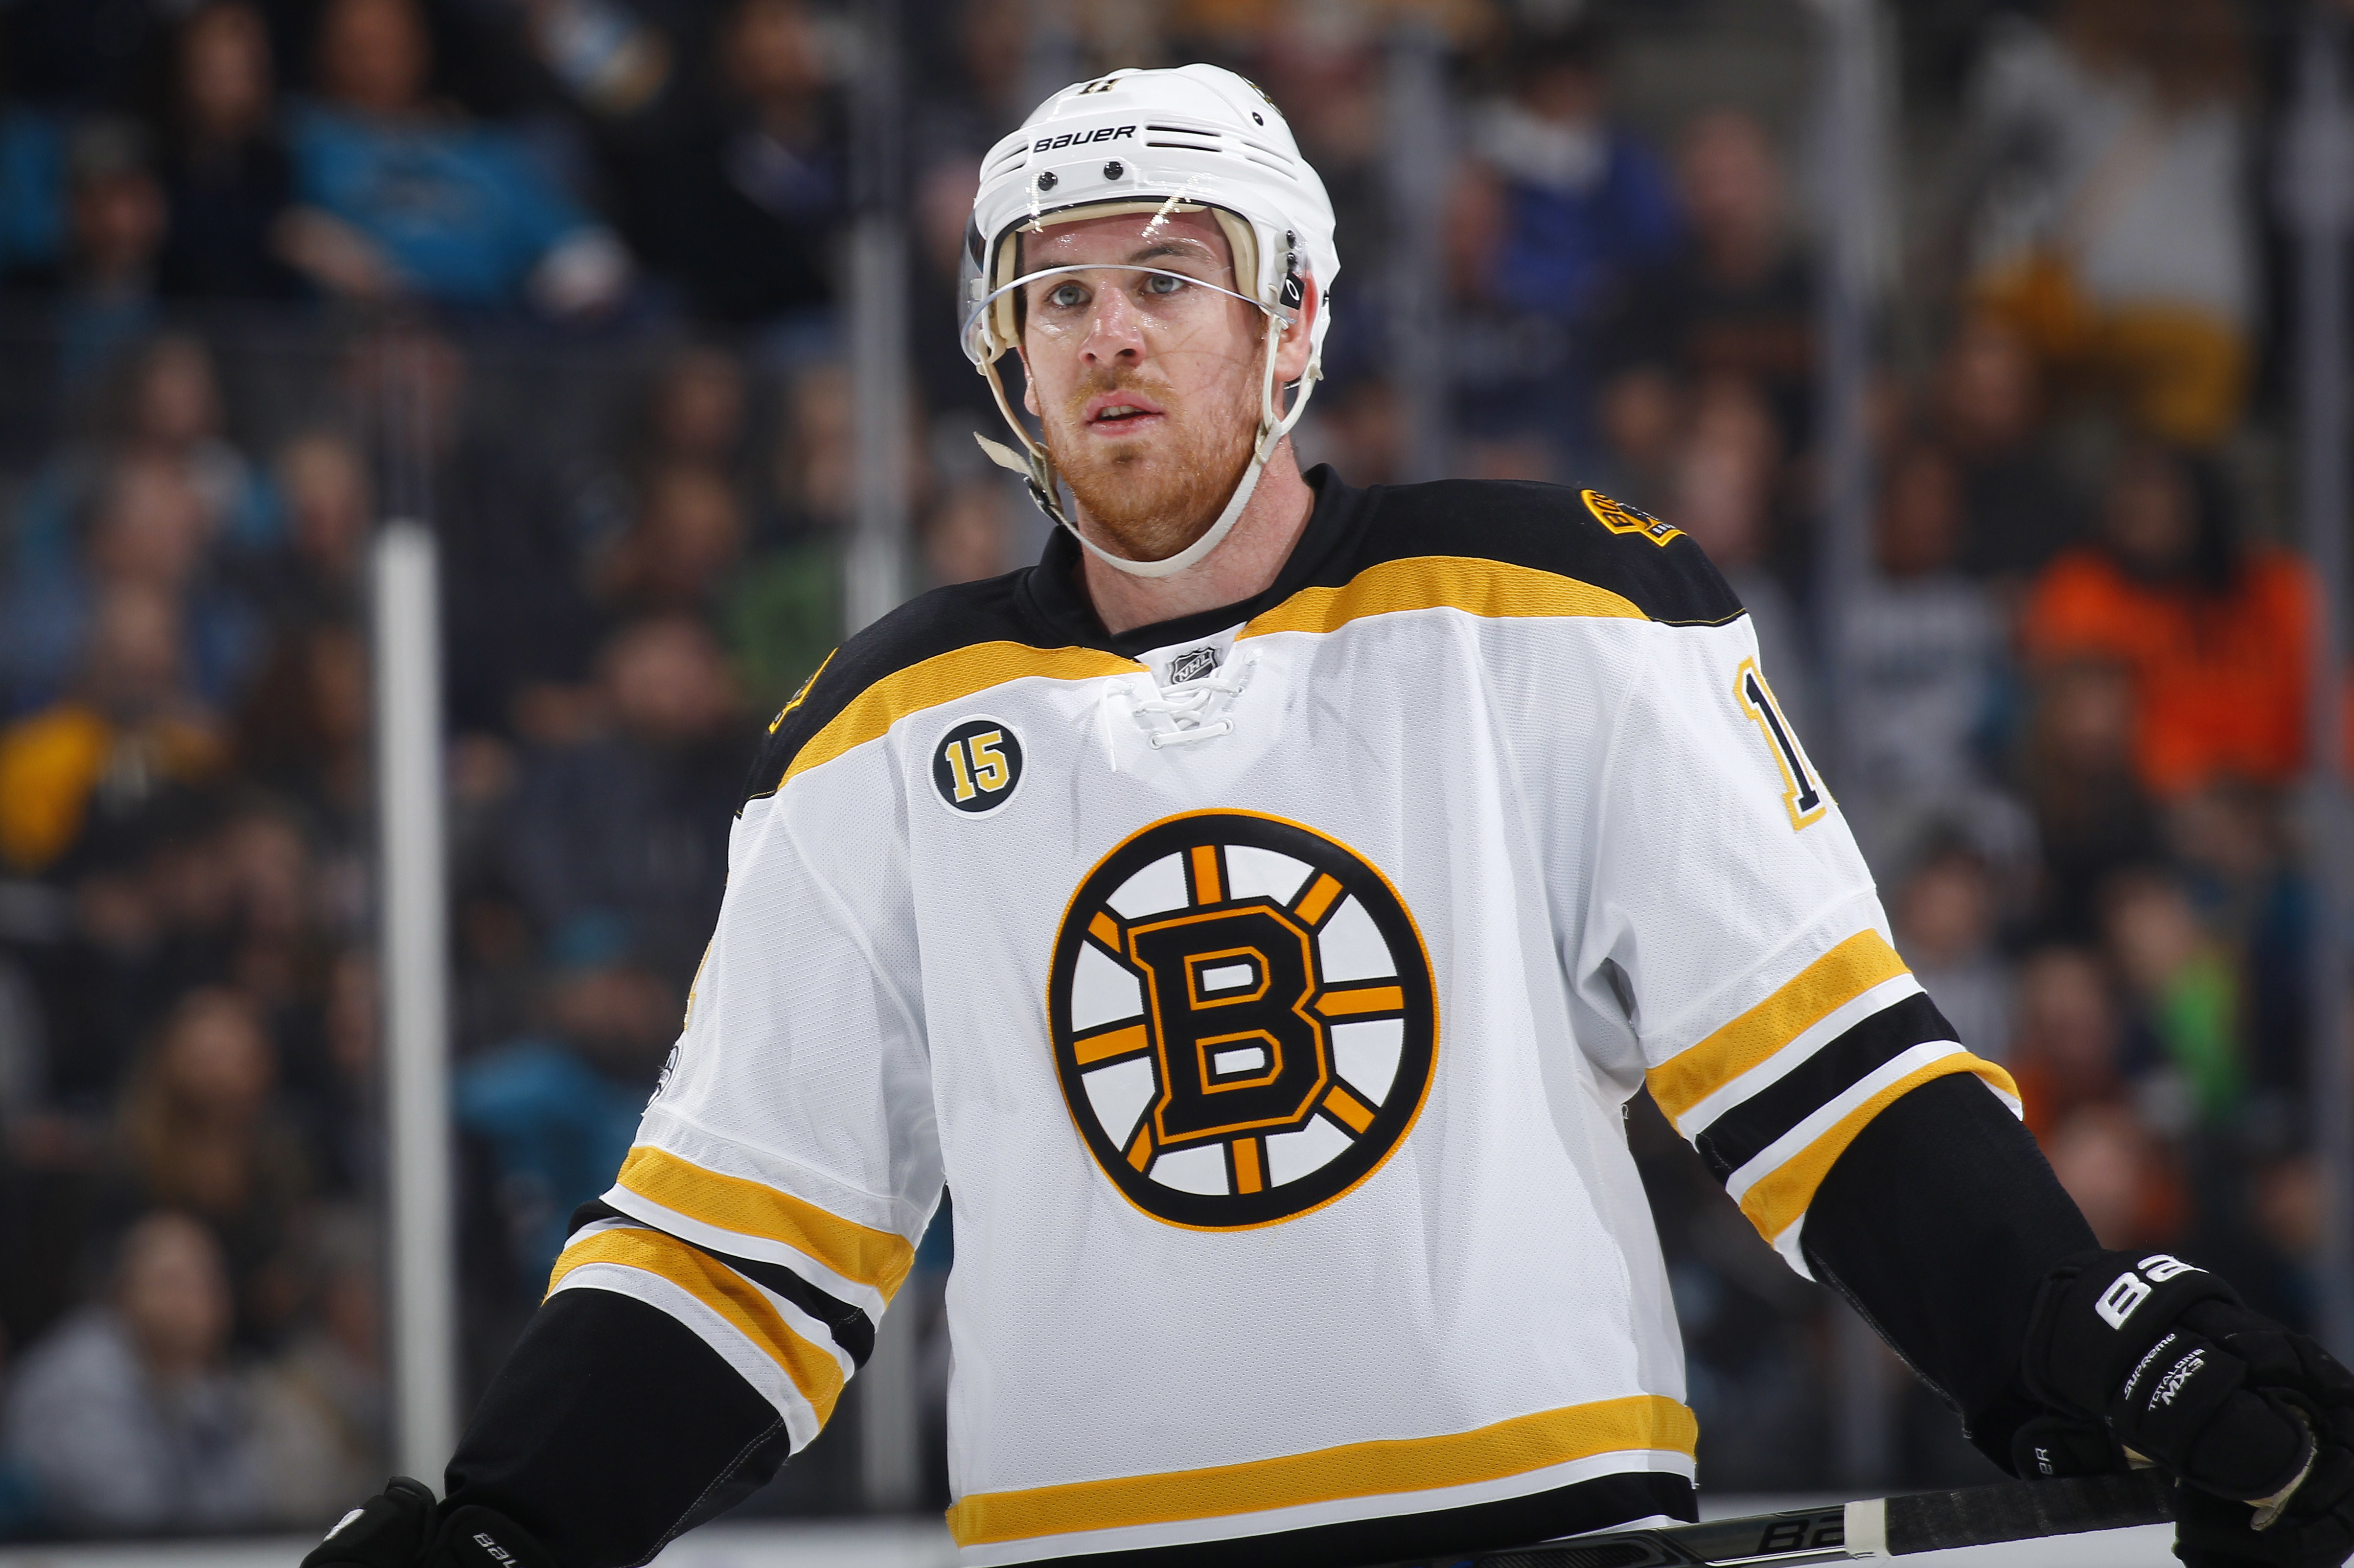 Jimmy Hayes, former Bruins player, dies unexpectedly at 31